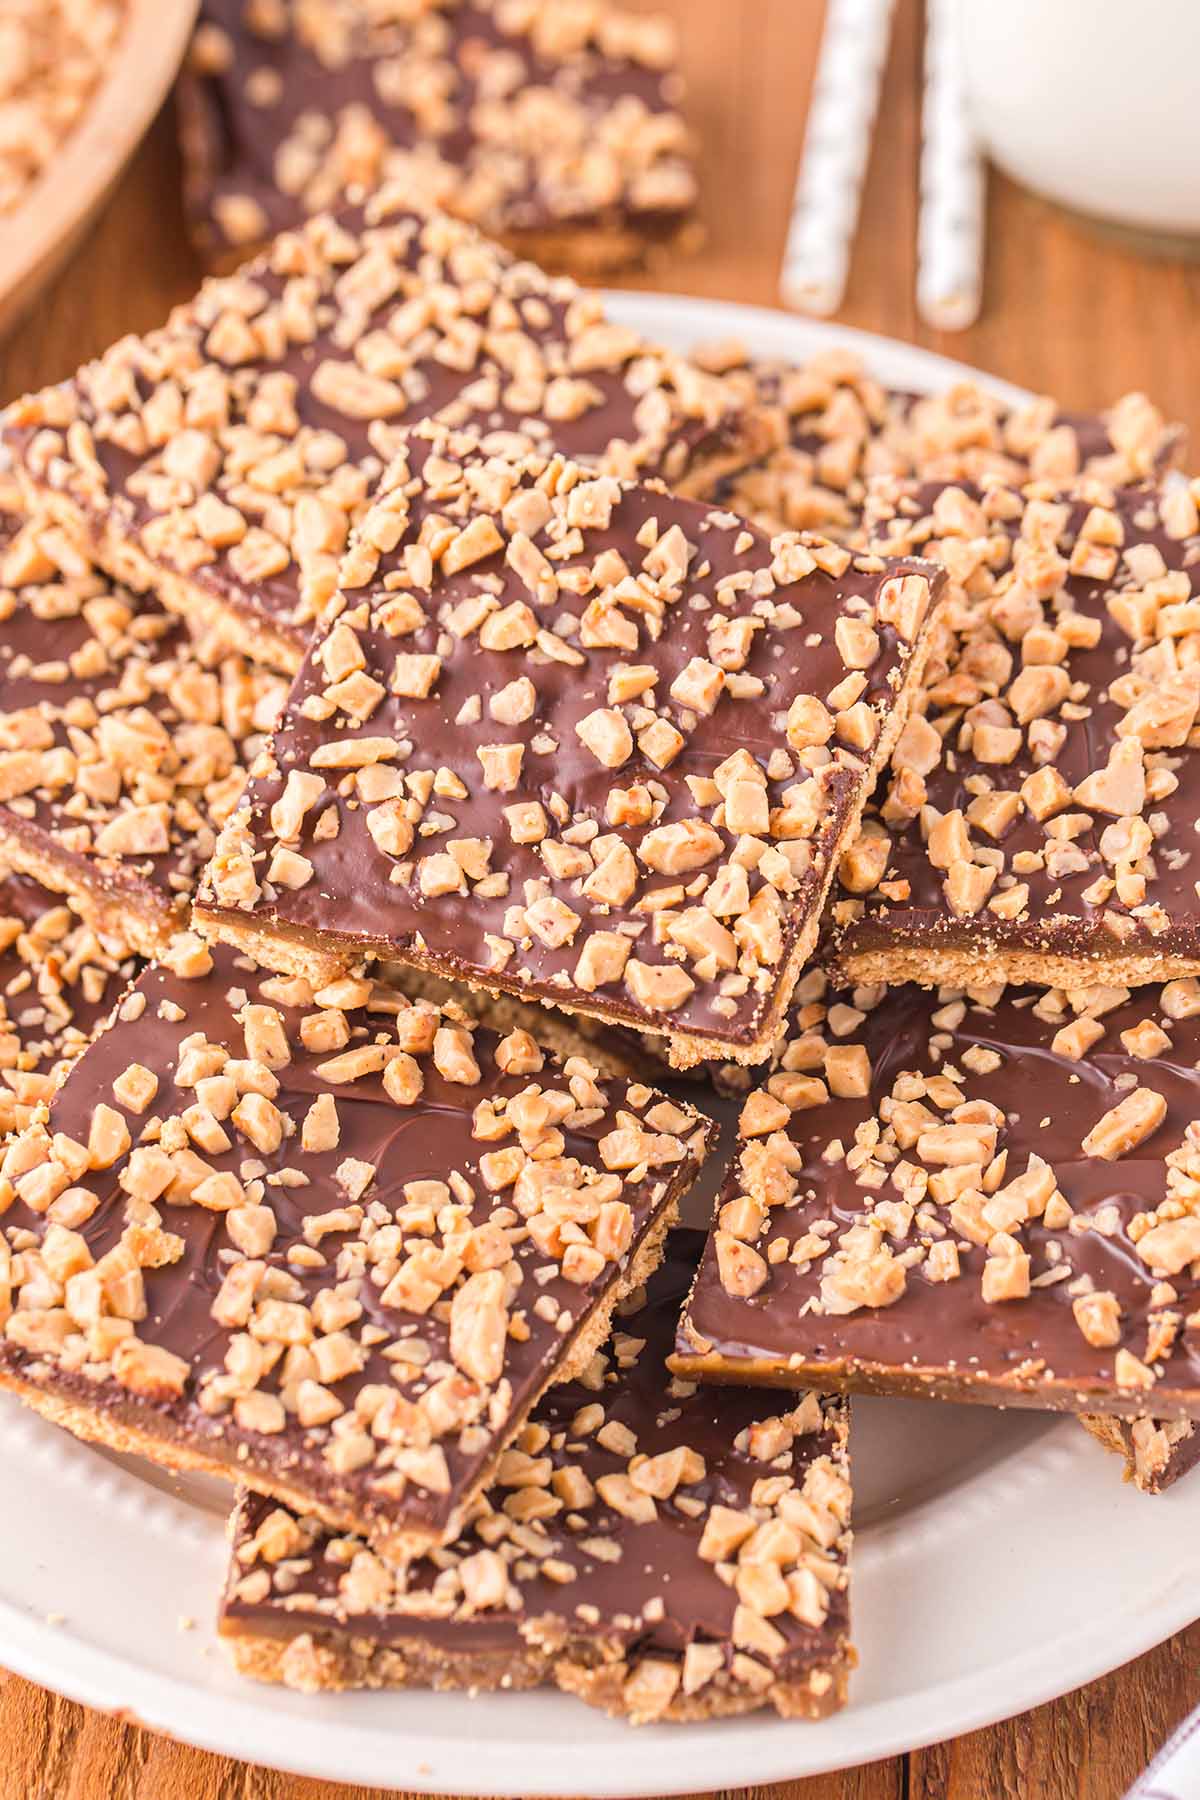 Graham Cracker Toffee Bars on the plate with toppings